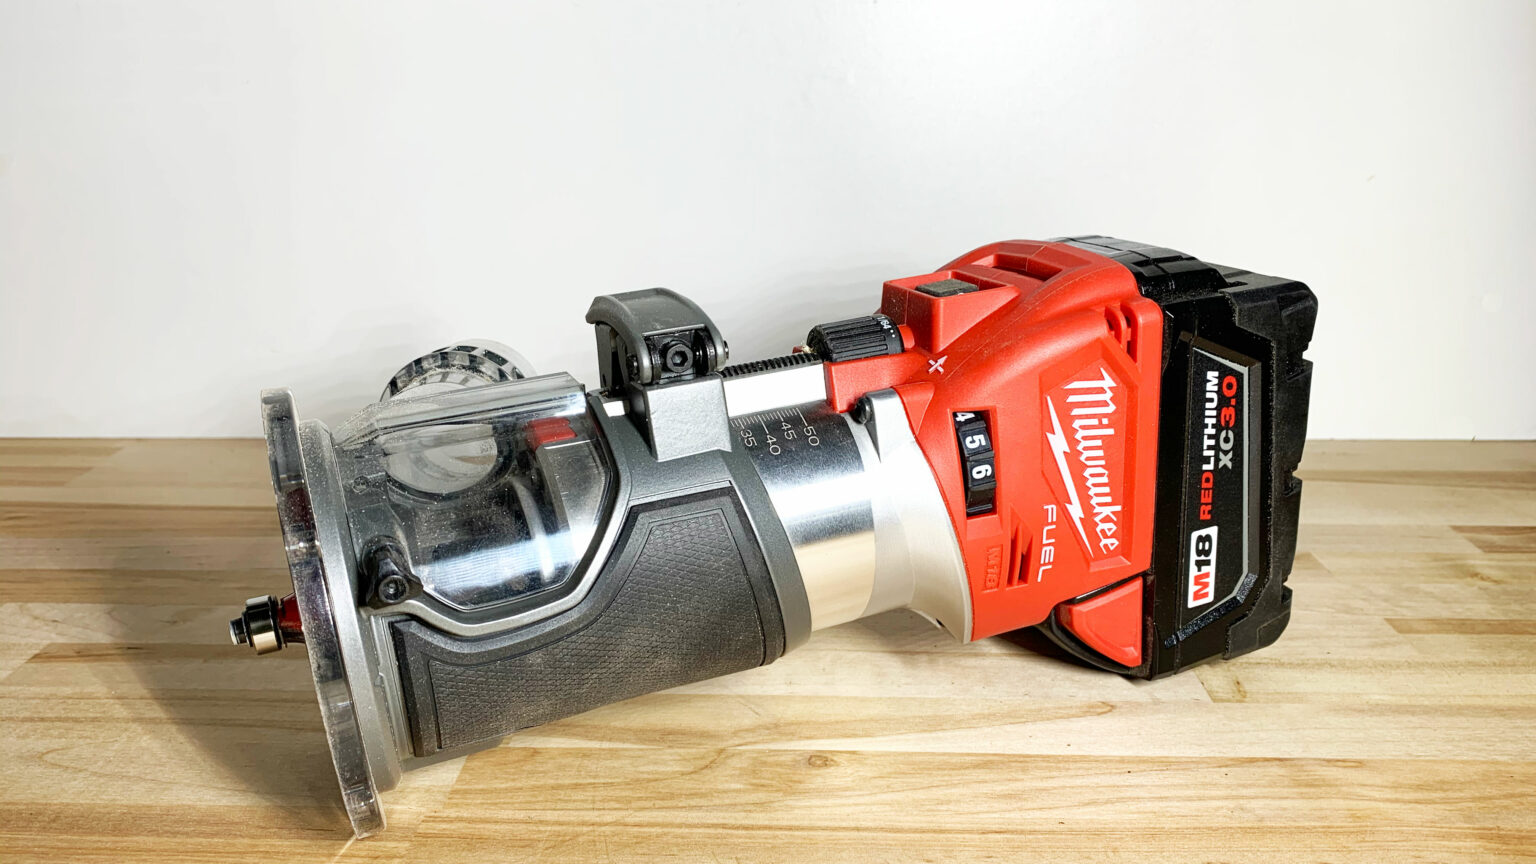 milwaukee m18 fuel router